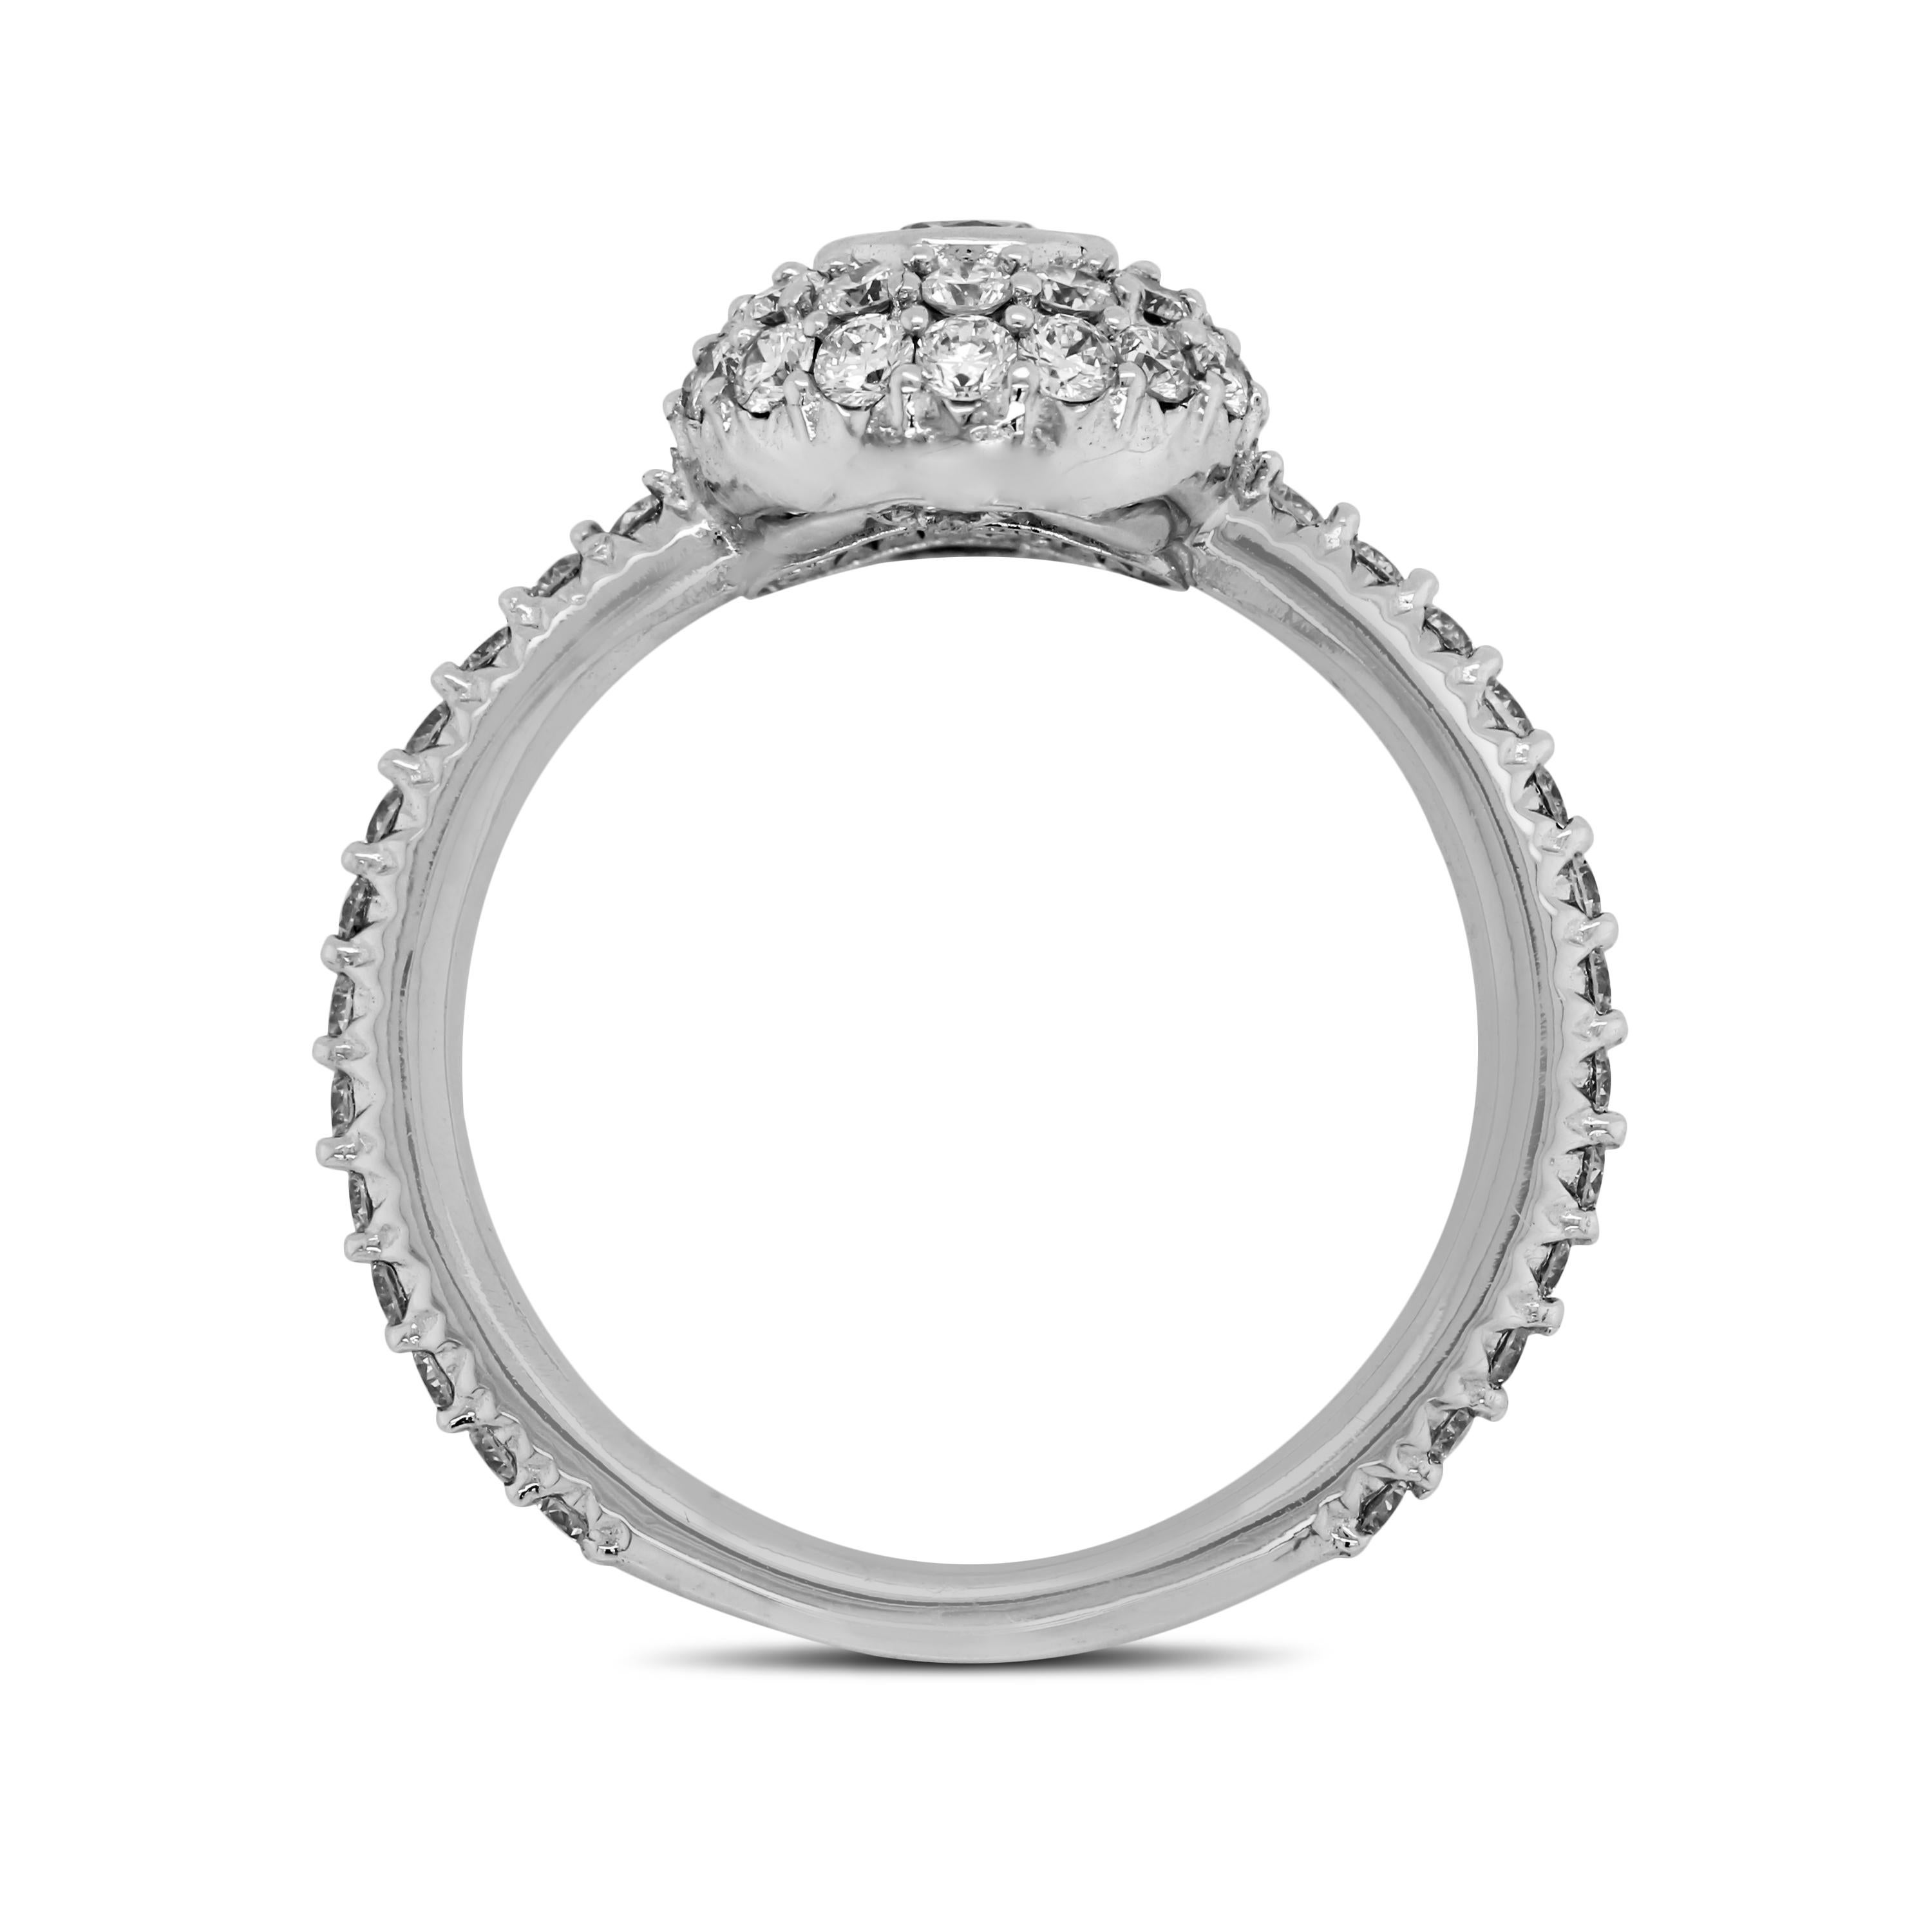 Stambolian 0.25 Carat Bezel Pavé Set Diamonds 18K White Gold Cocktail Ring

This fun, everyday ring features diamonds set all throughout with a bezel-set diamond center

1.09 carat G color, VS clarity diamonds total weight. (Center diamond is 0.25